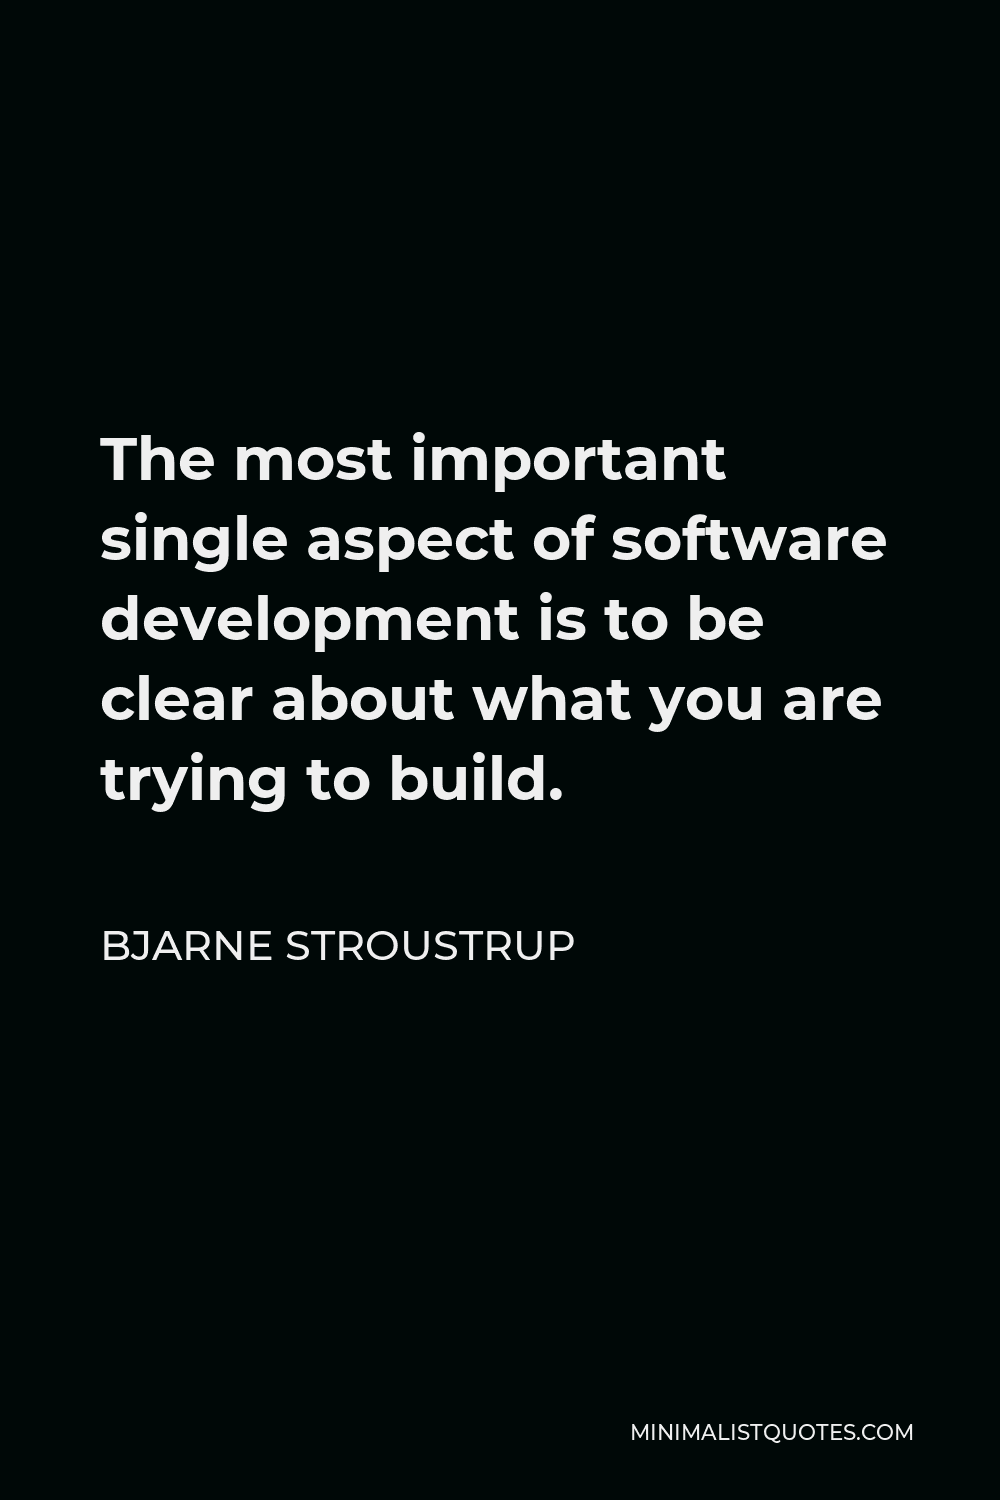 Bjarne Stroustrup Quote - The most important single aspect of software development is to be clear about what you are trying to build.